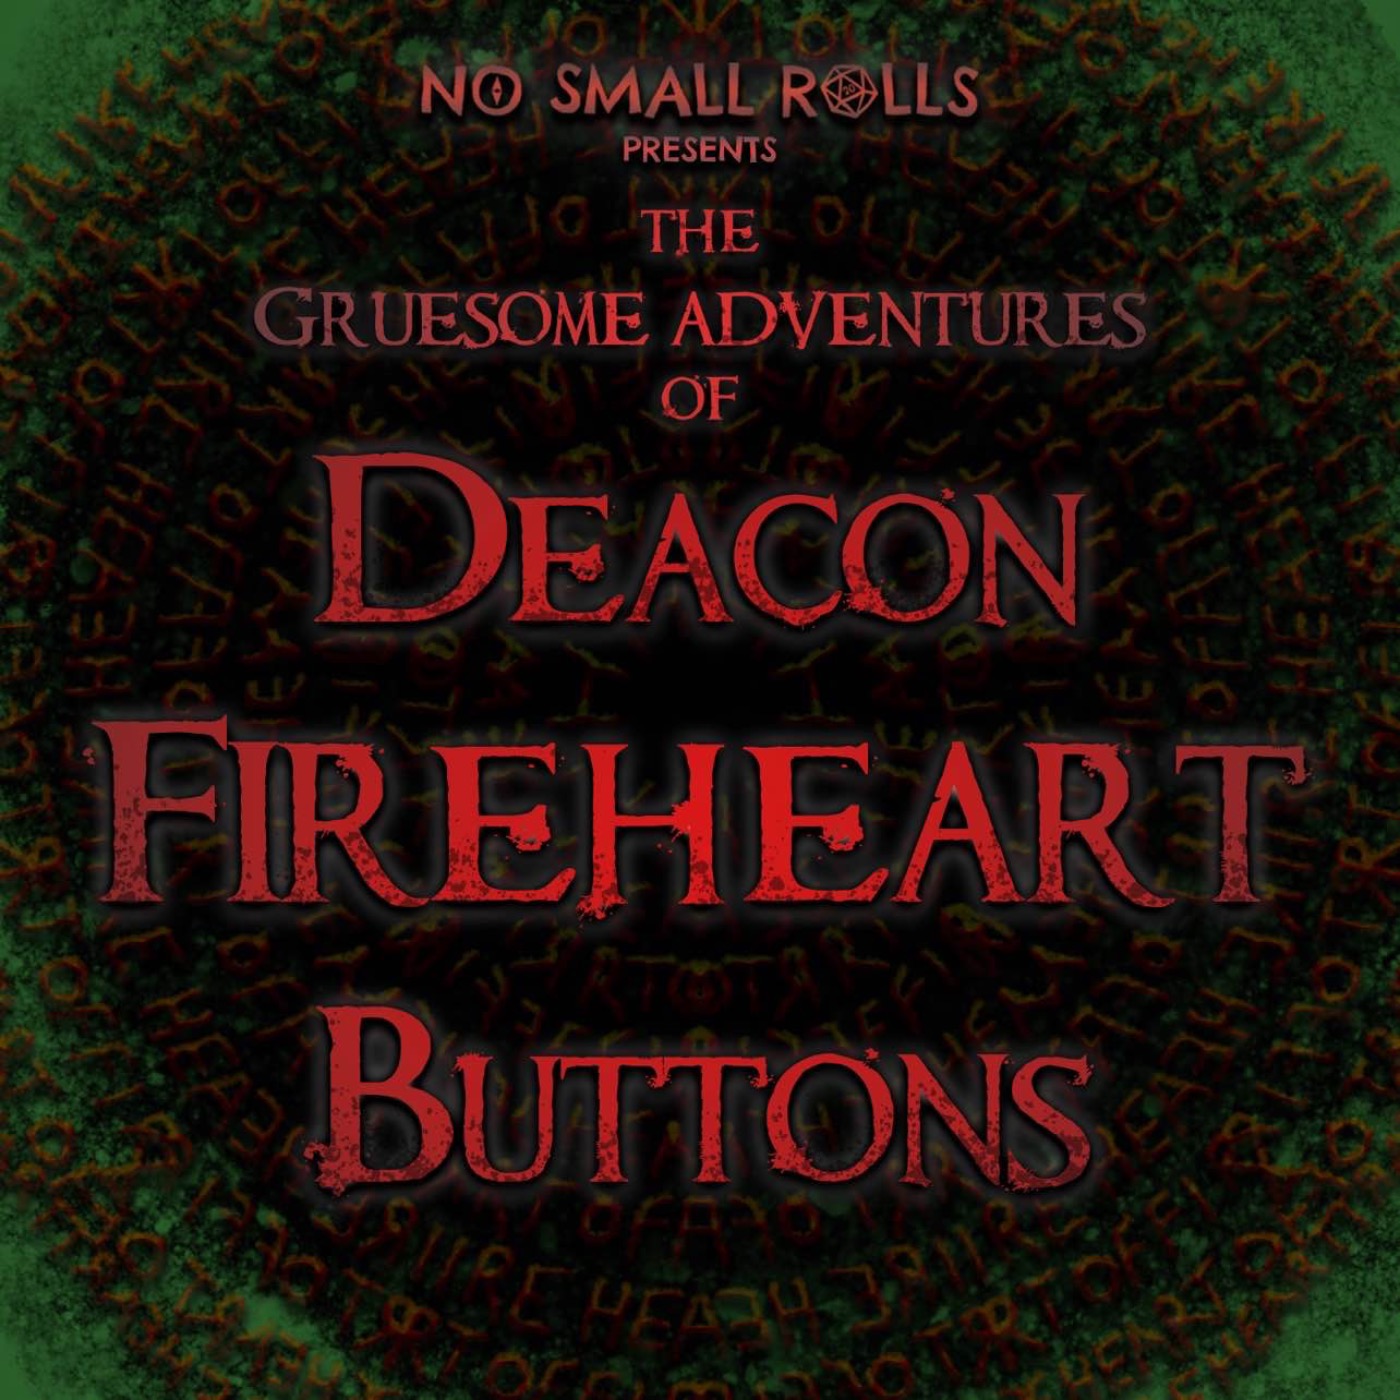 cover art for The Gruesome Adventures of Deacon Fireheart Buttons - Trailer